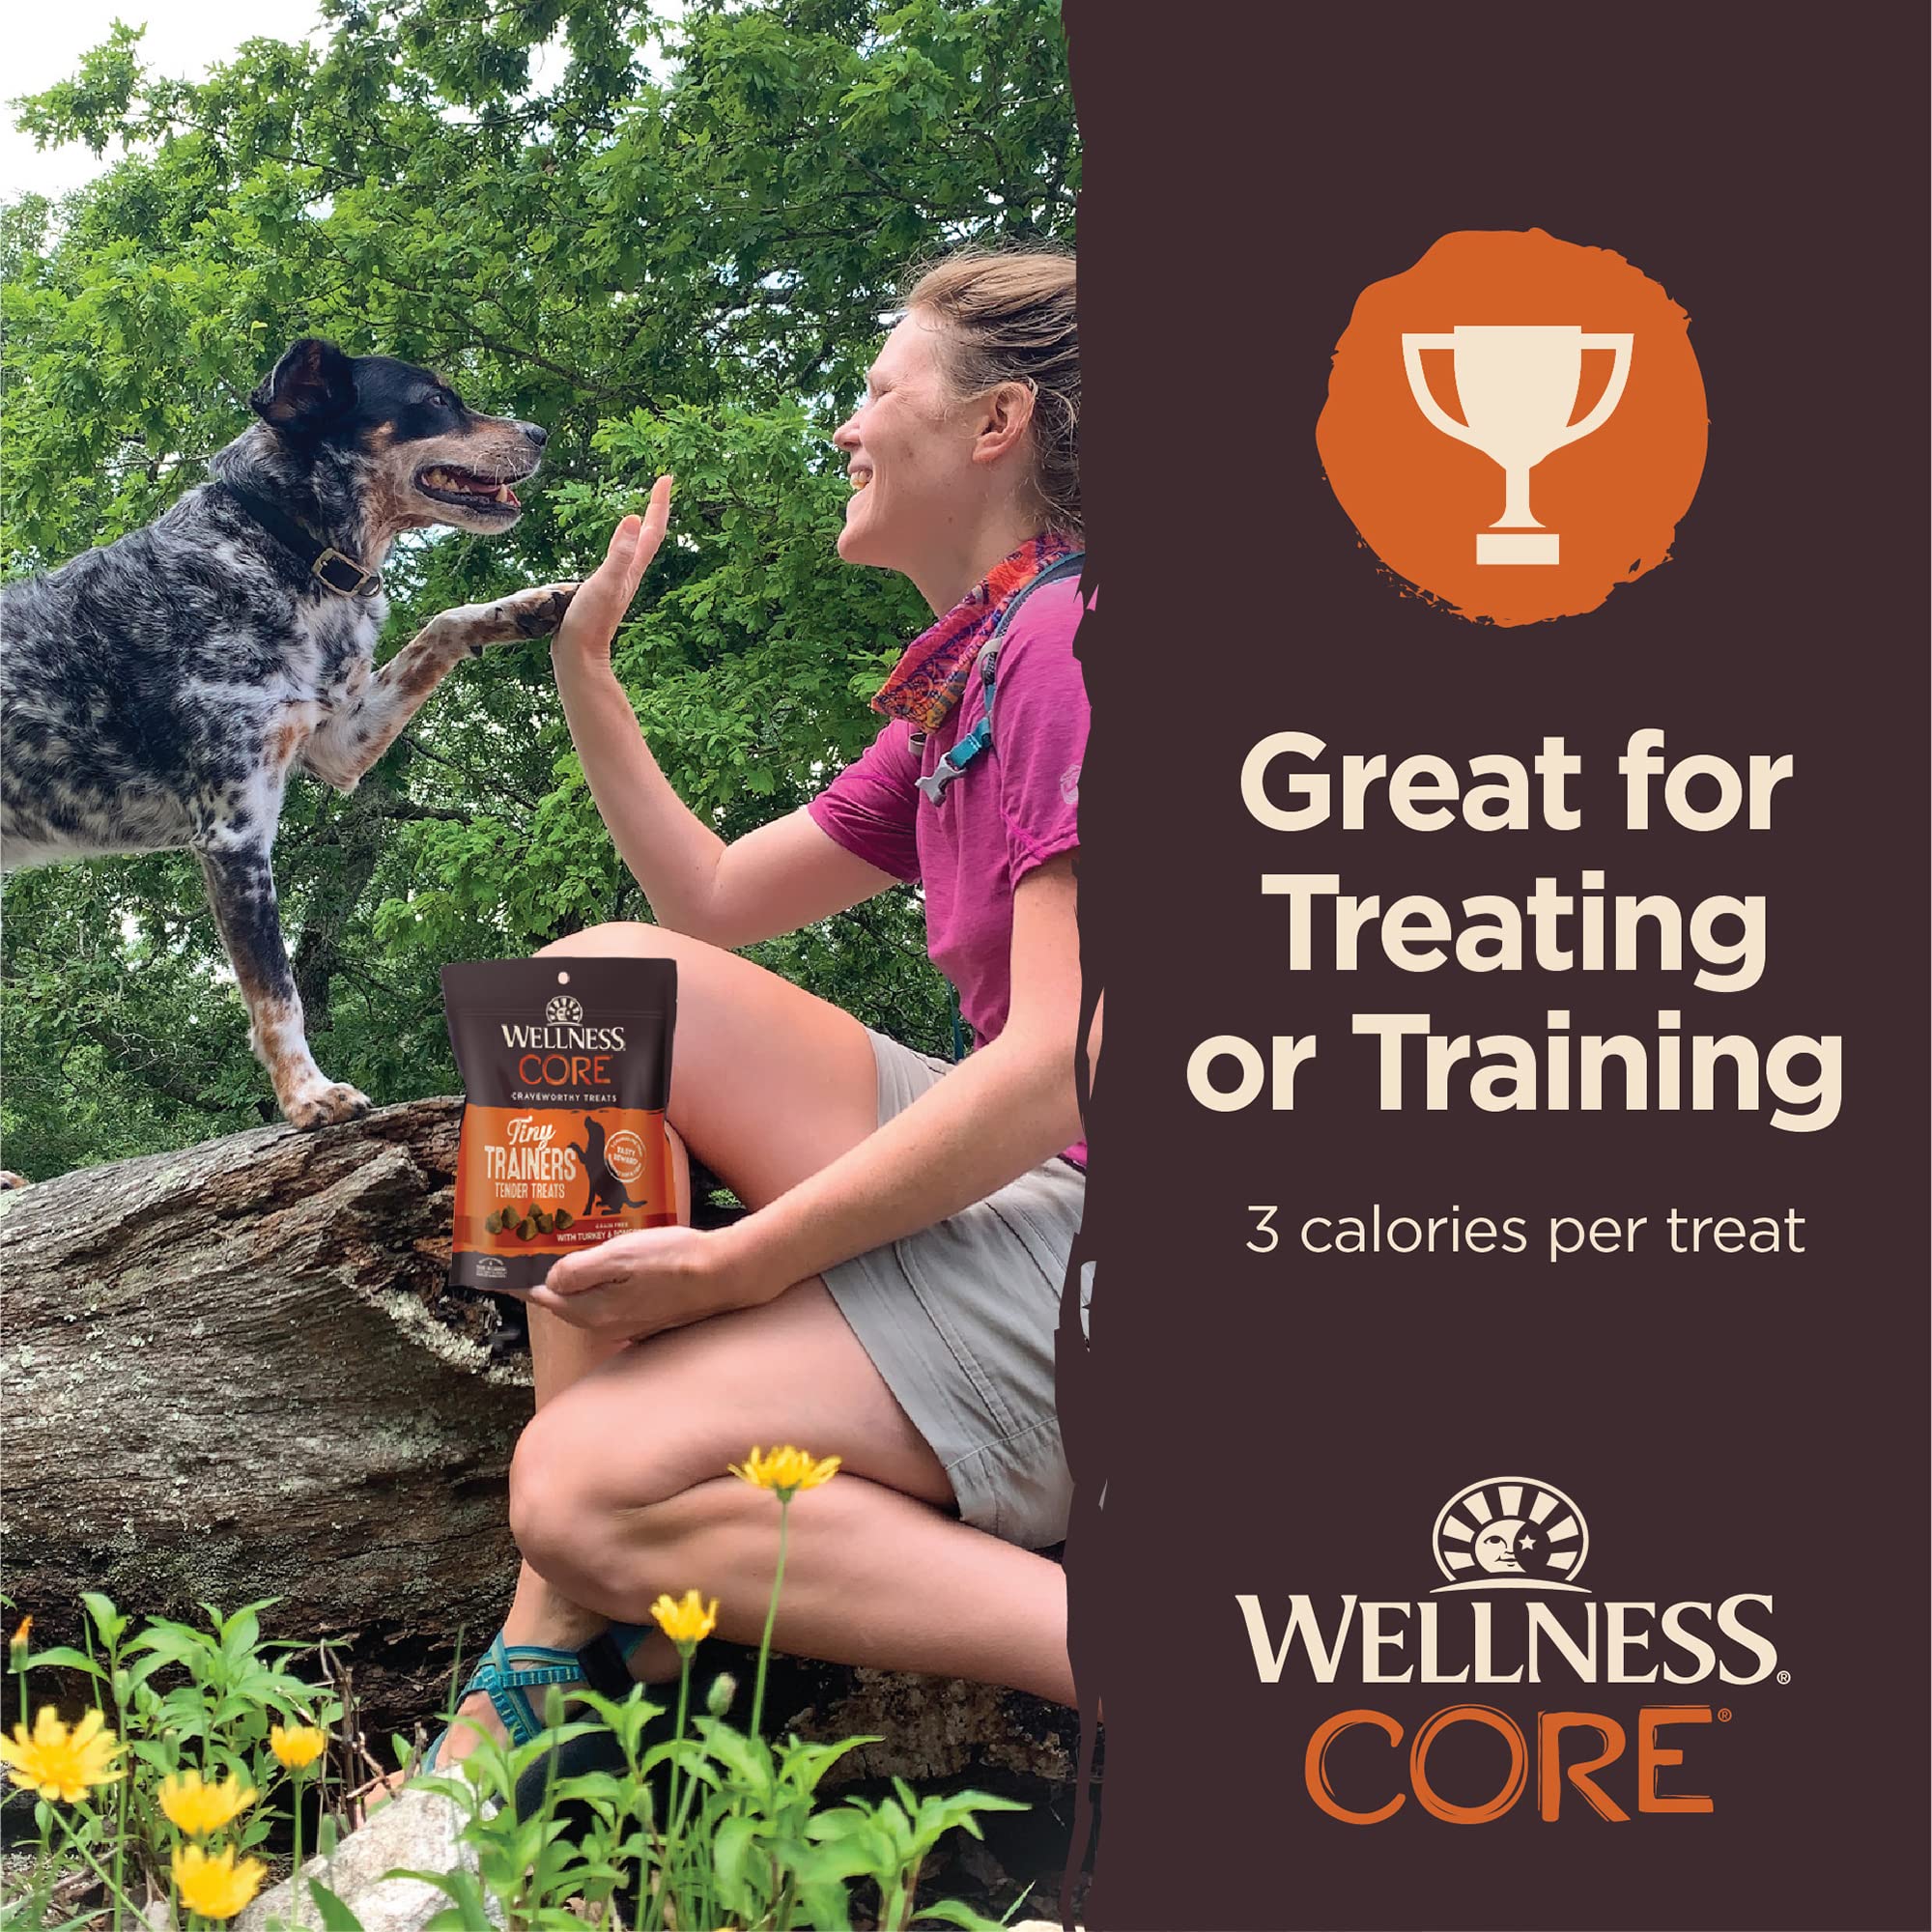 Wellness Core Tiny Trainers Grain-Free Tender Turkey and Pomegranate Soft and Chewy Training Dog Treats - 6 Oz  